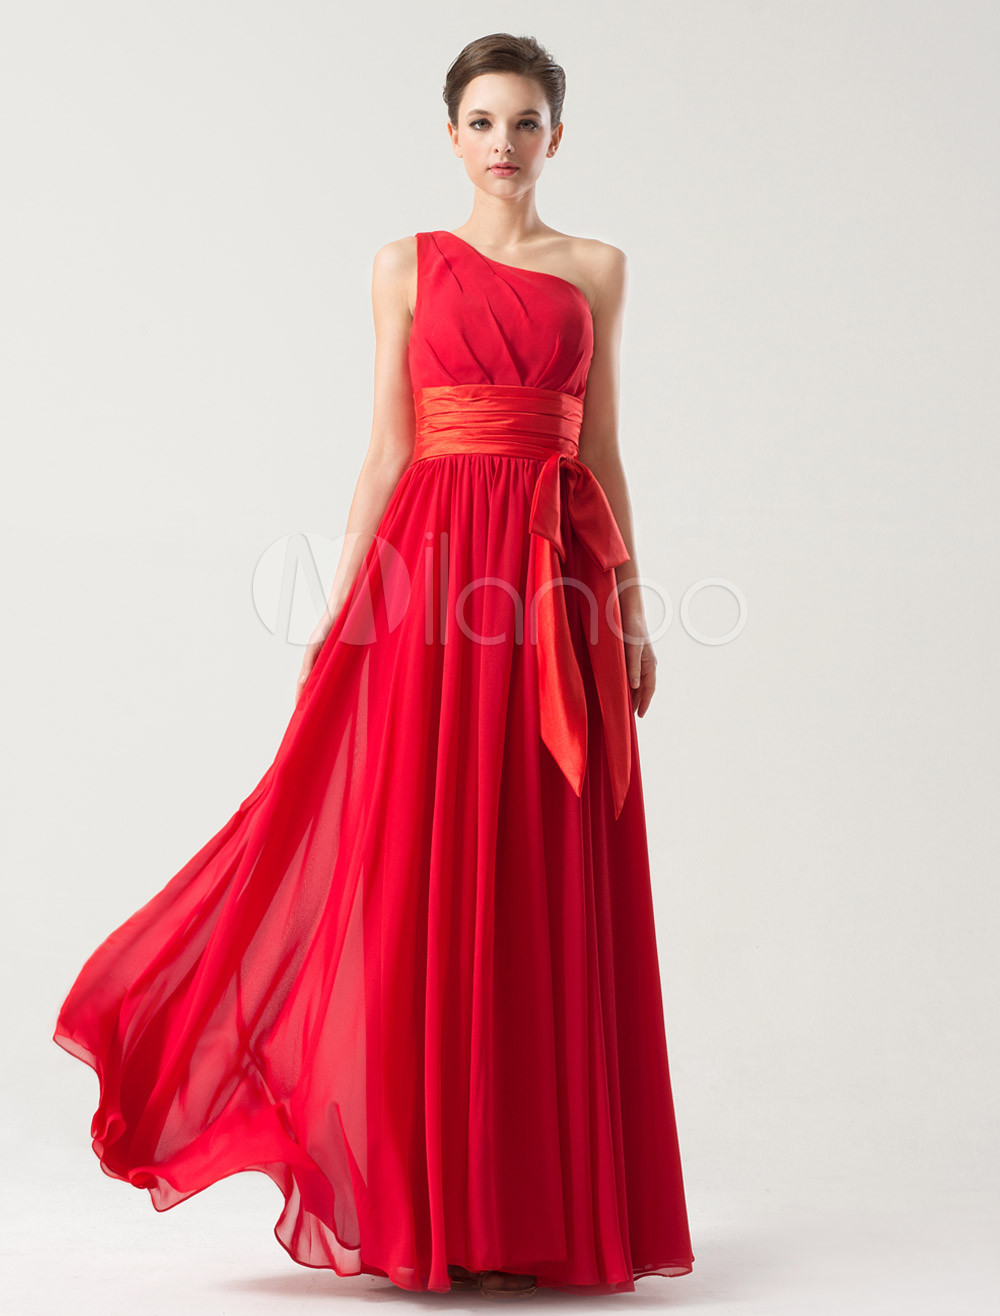 Gorgeous Red A-line One-Shoulder Bow Chiffon Prom Dress (Wedding Prom Dresses) photo